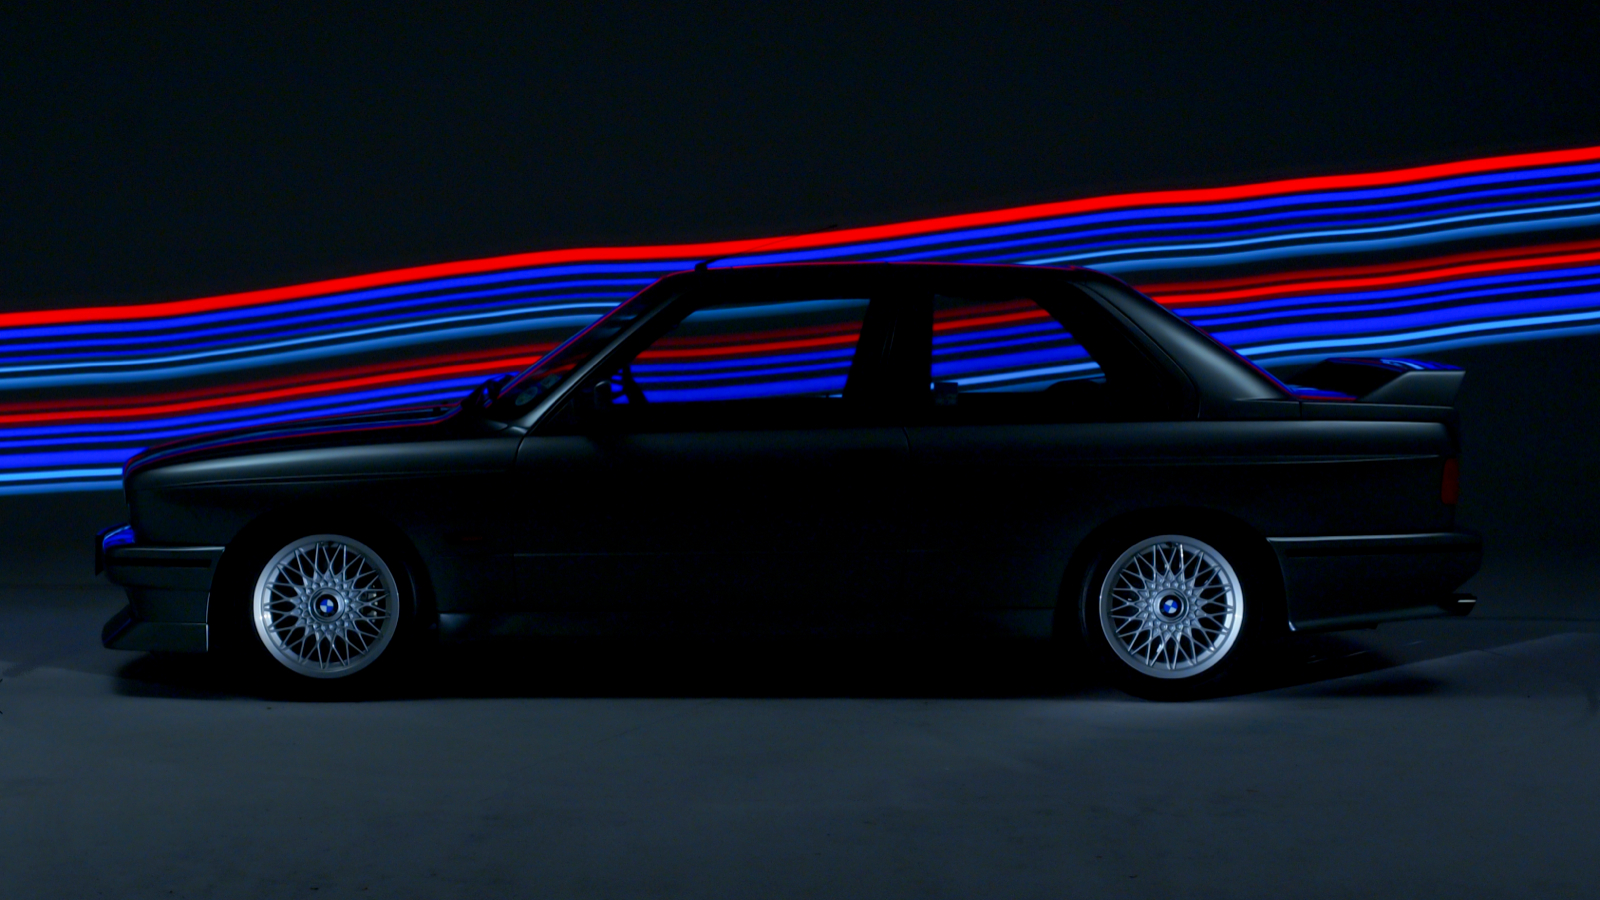 Your Ridiculously Luminous E30 Bmw M3 Wallpaper Is Here